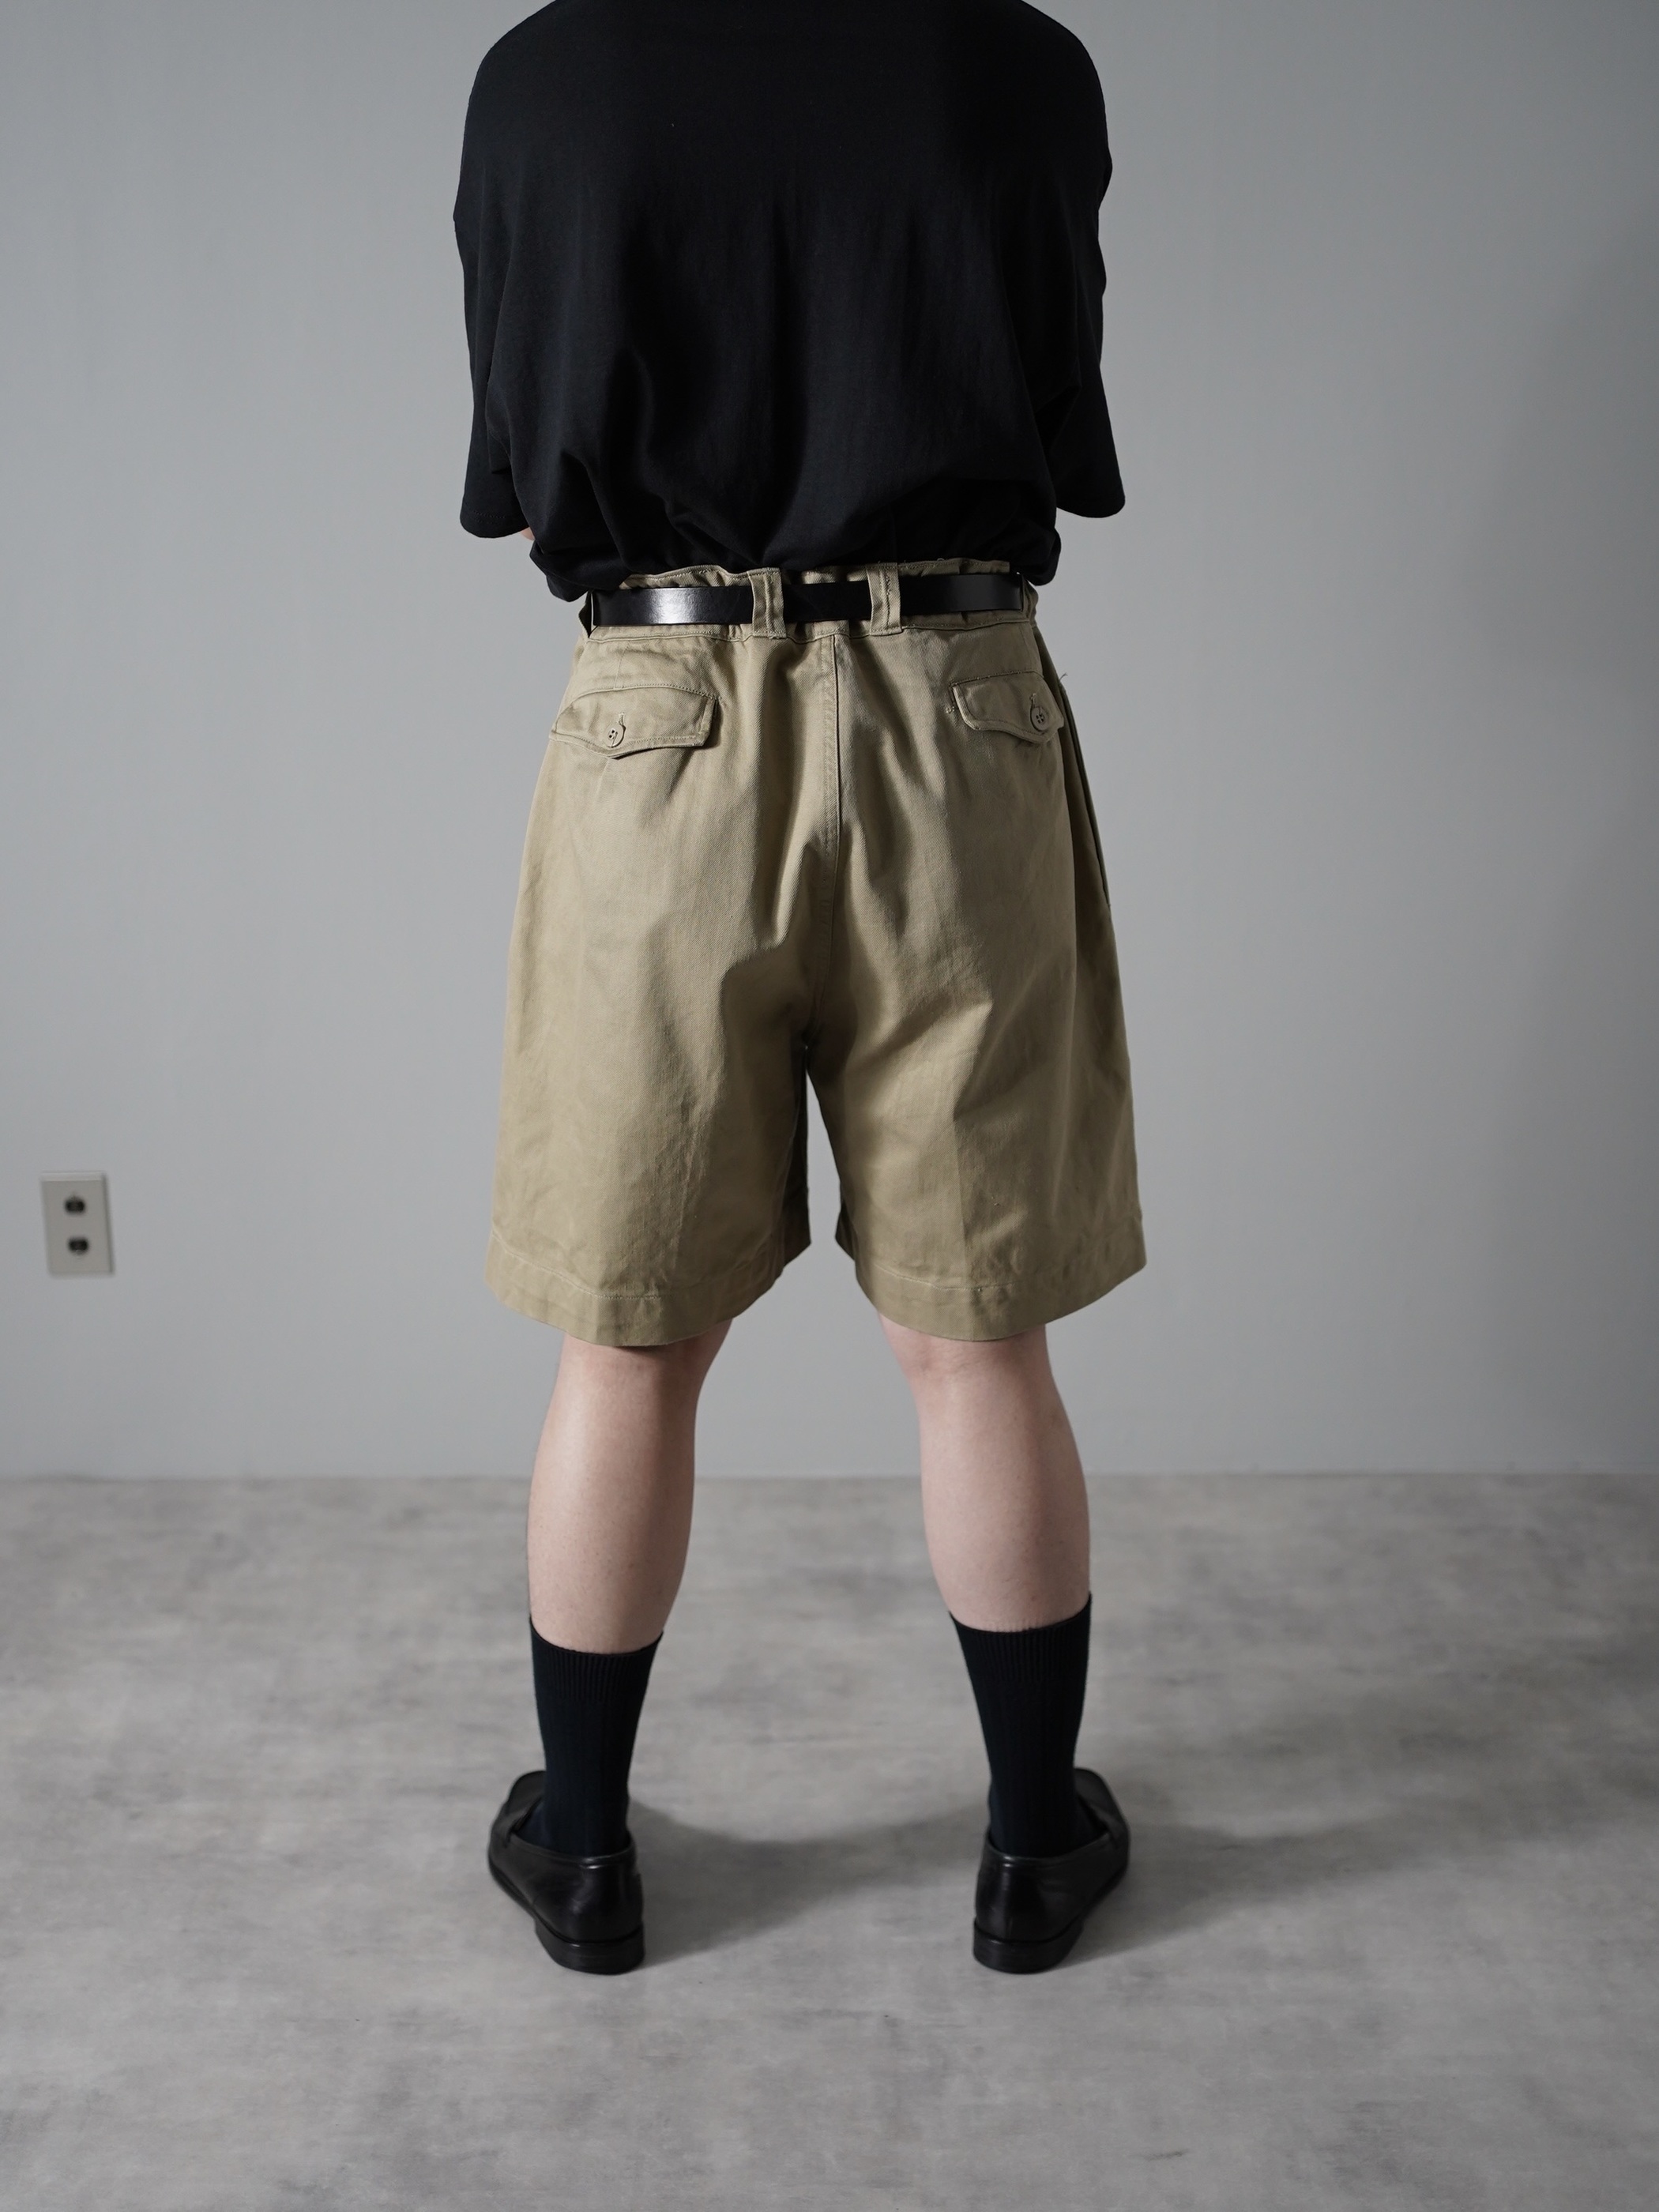 1950-60's FRENCH ARMY M-52 後期 Chino shorts / Size 7